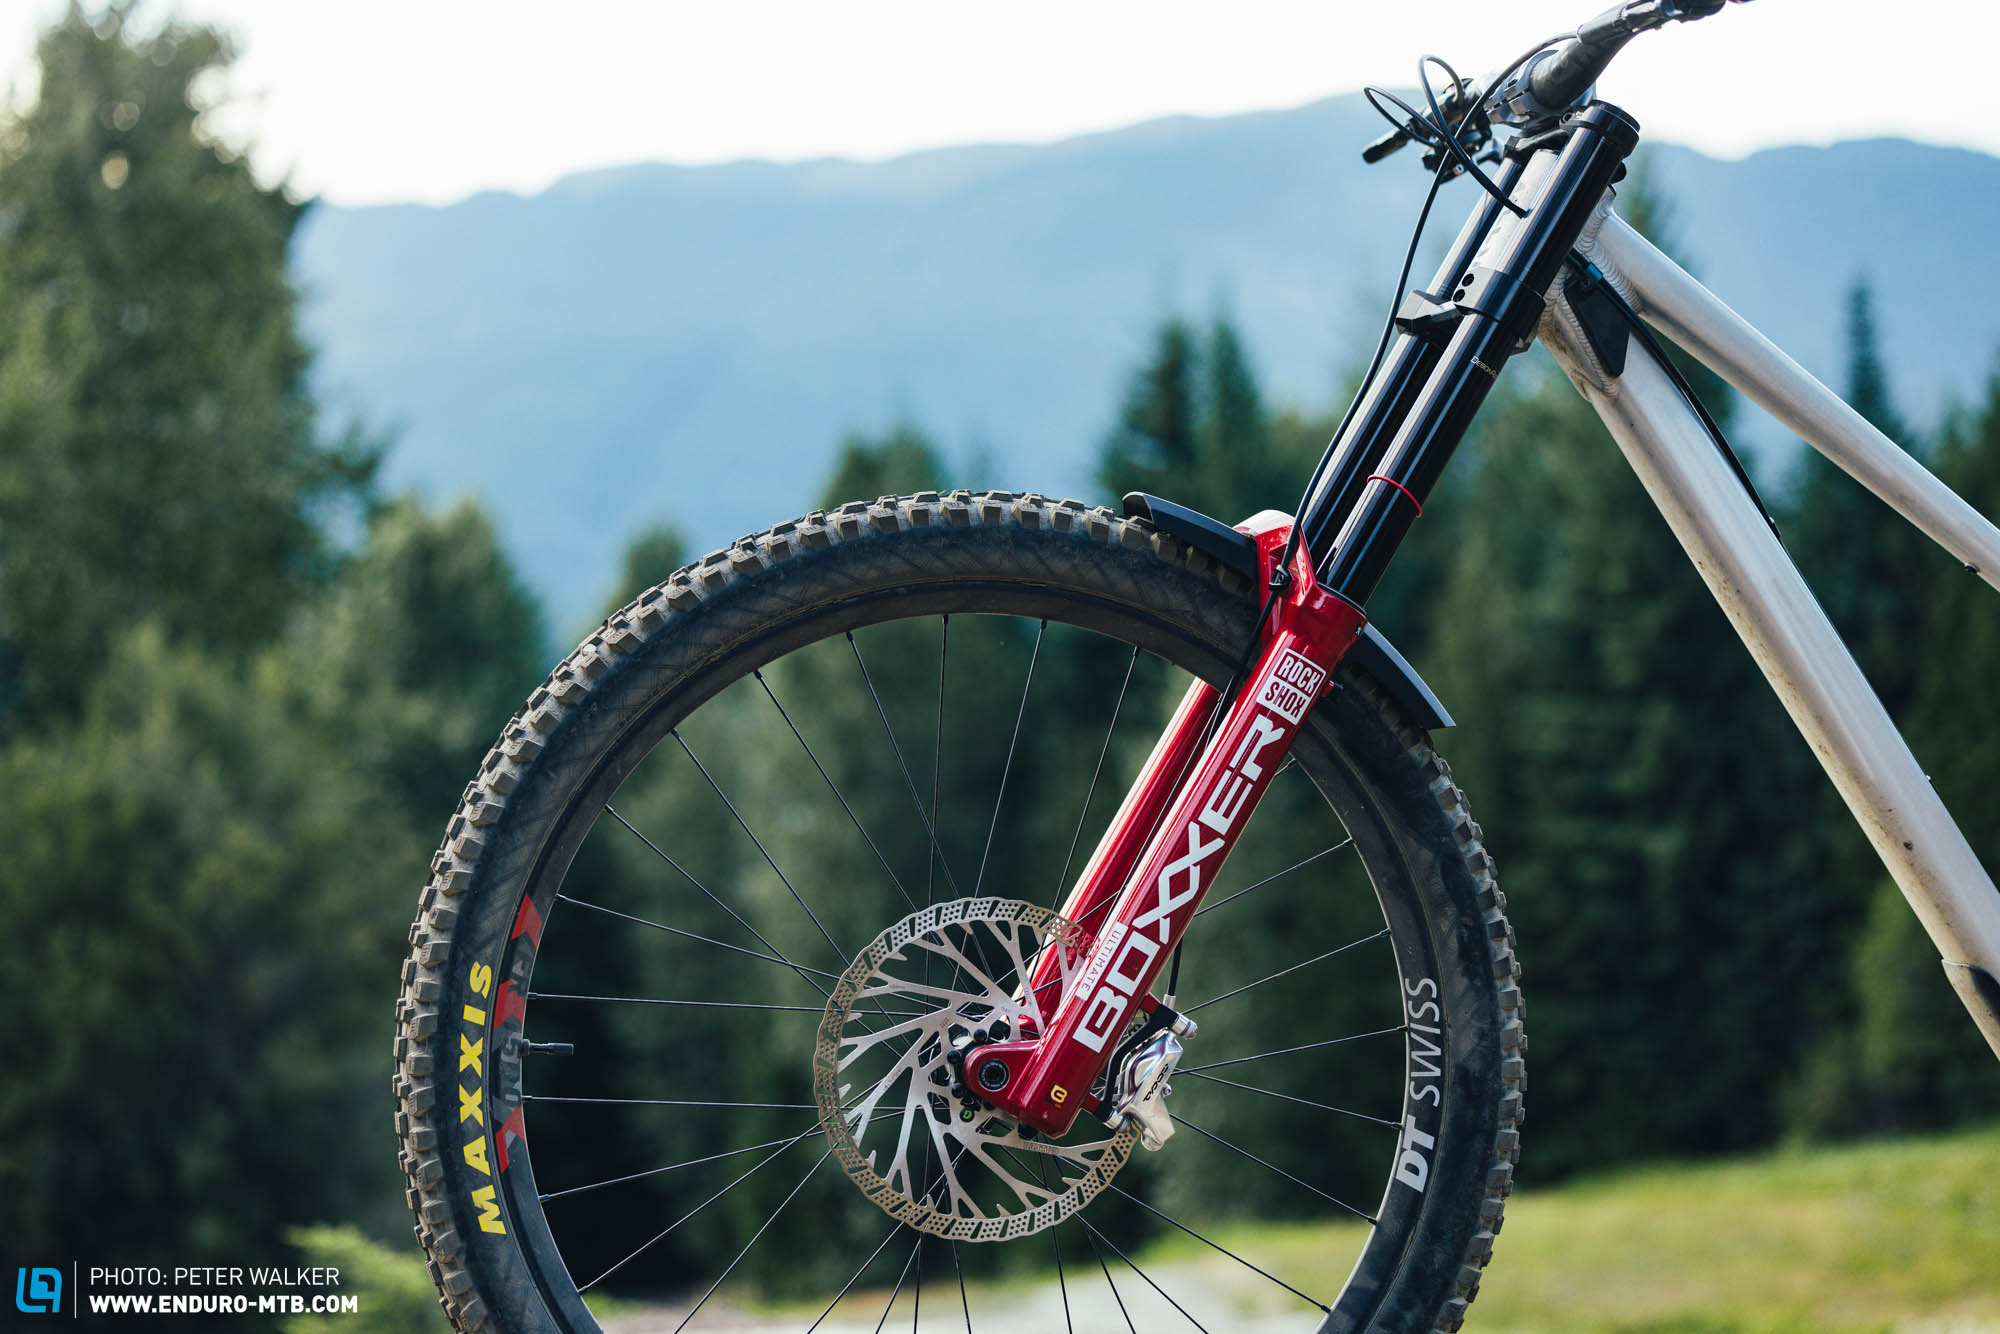 New Rock Shox BoXXer fork first ride review - Smooth operator